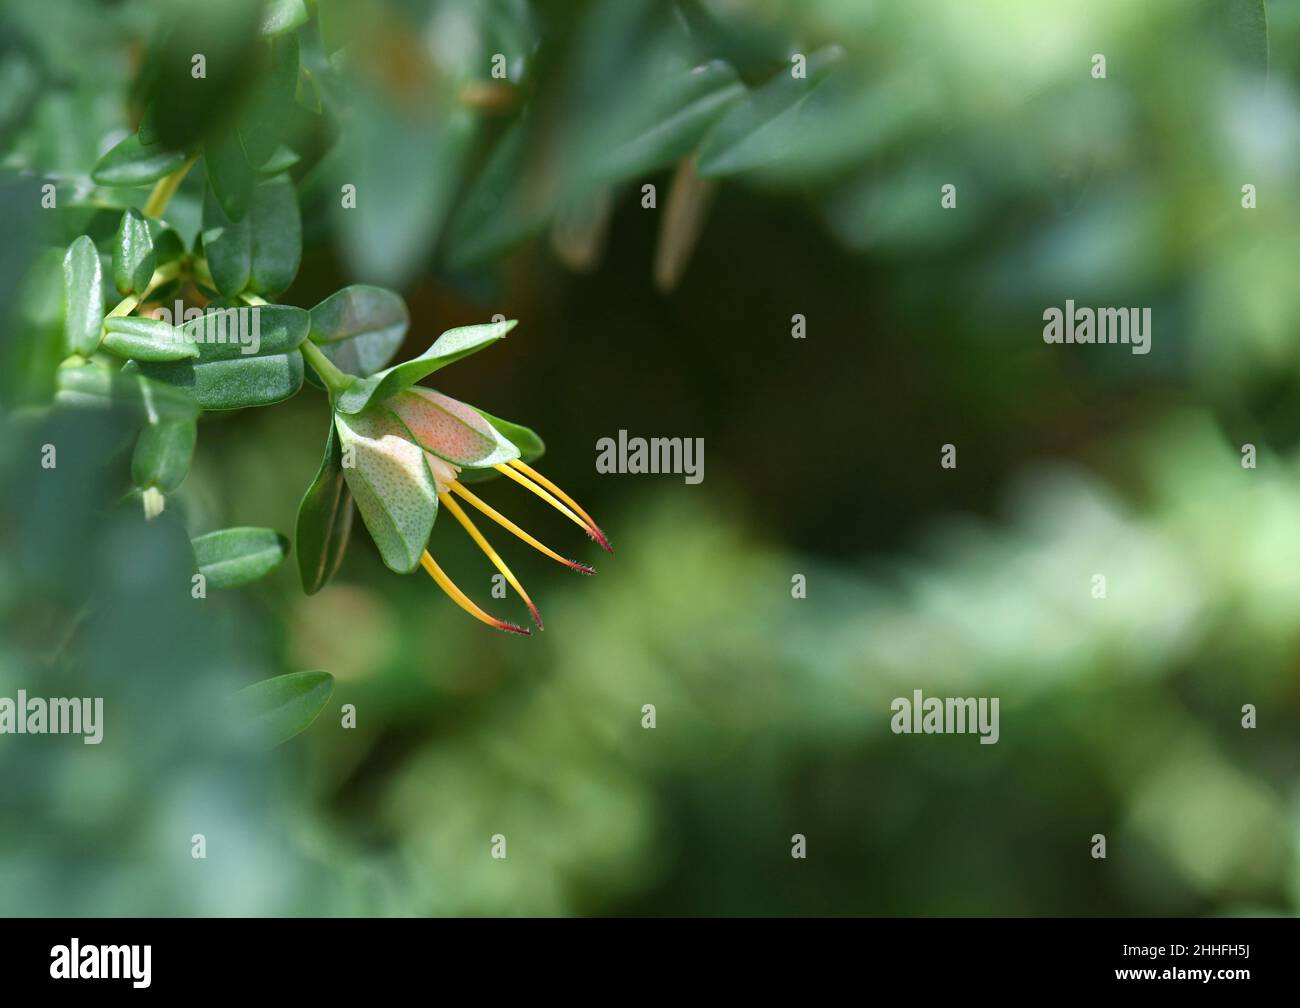 Australian nature background of native Lemon Scented Myrtle inflorescence, Darwinia citriodora, family Myrtaceae. Flowers with prominent yellow style Stock Photo